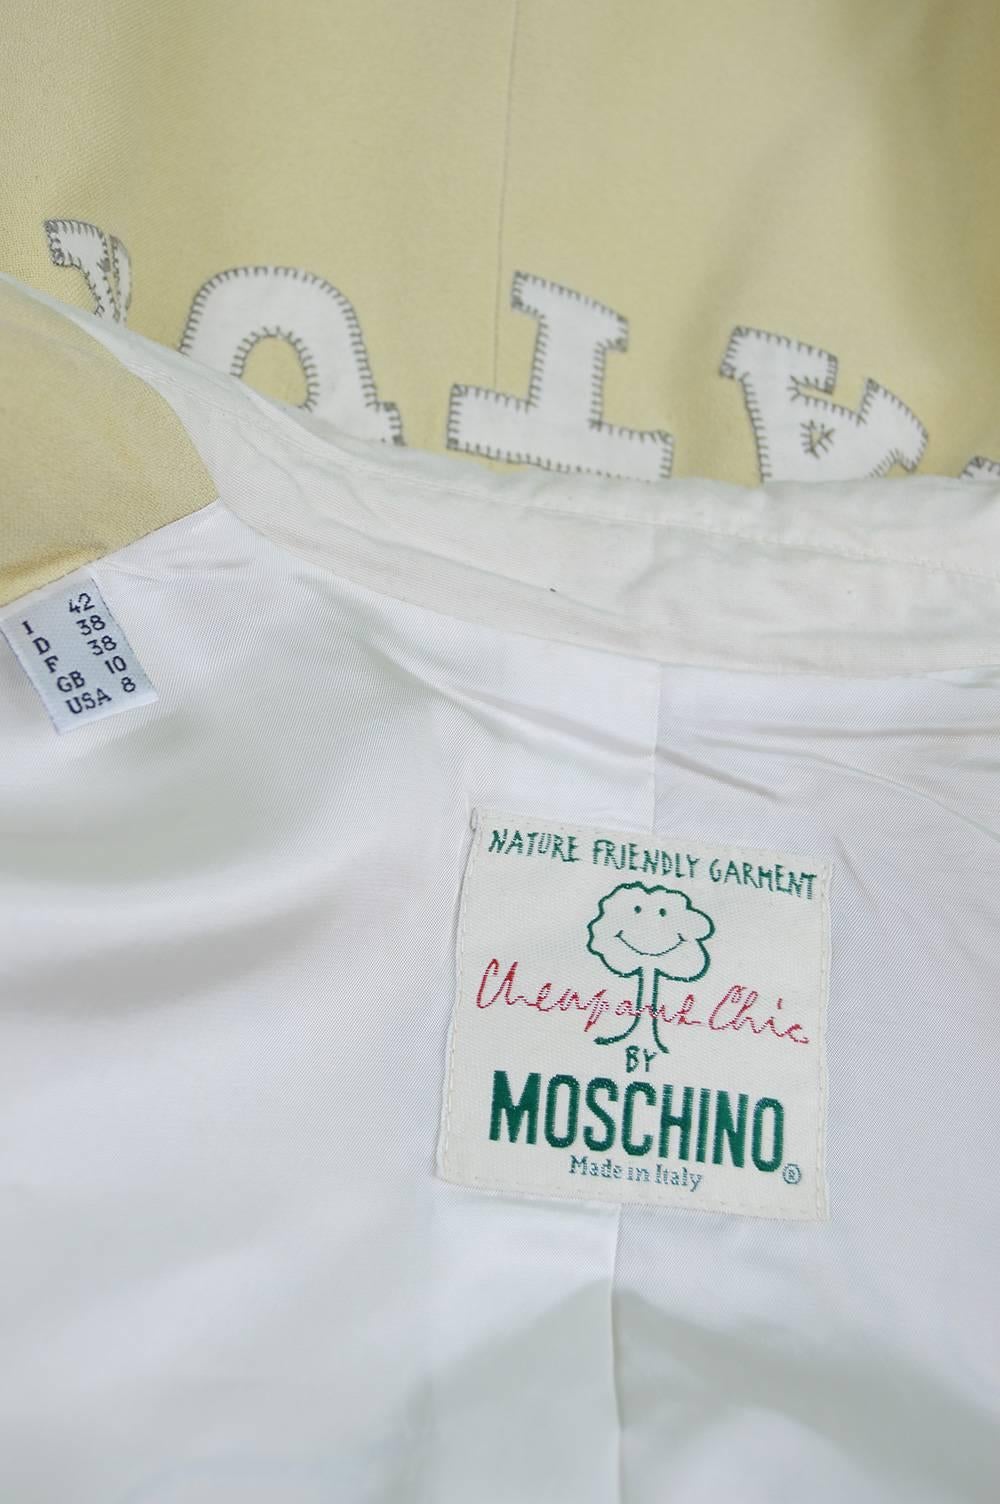 Moschino 'Save Nature' Eco-couture Jacket - Franco's Final Collection, 1994 2